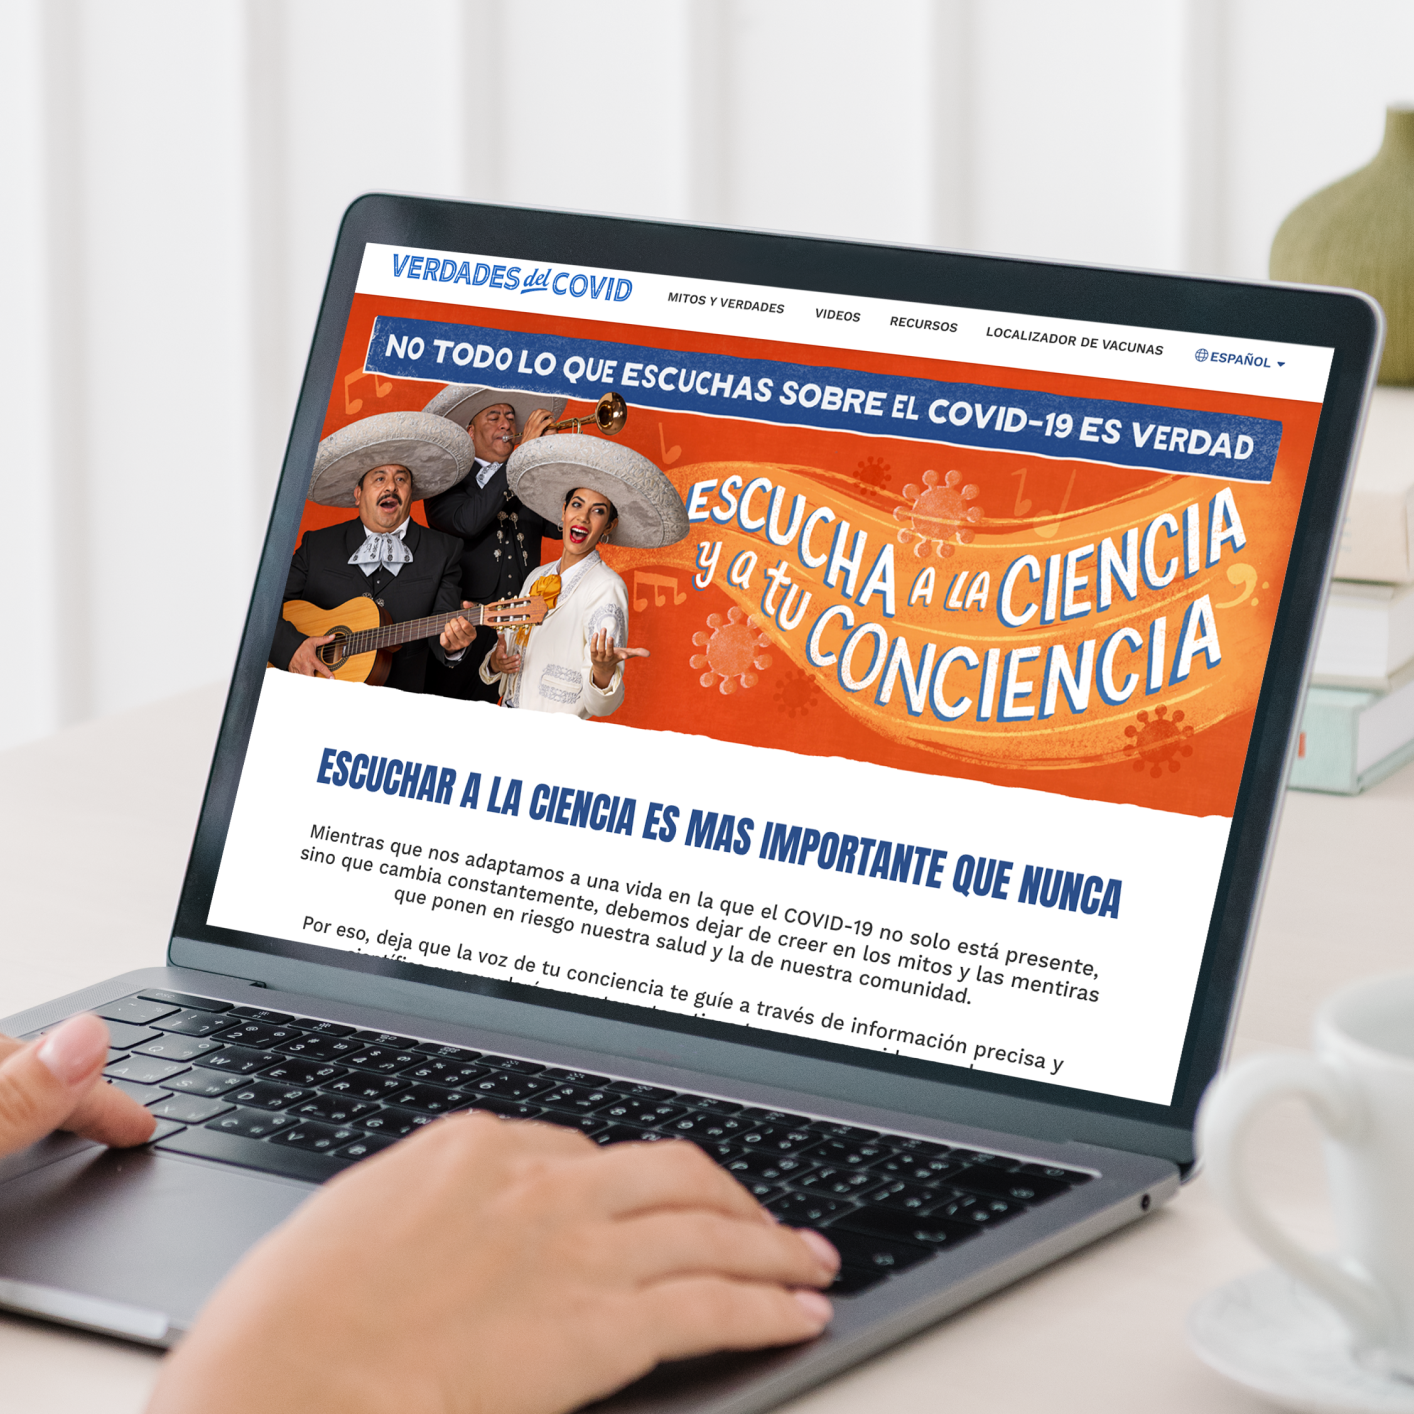 The website is focused on the Hispanic/Latinx community to provide important vaccine information through engaging graphics and a unique parallax scrolling effect.